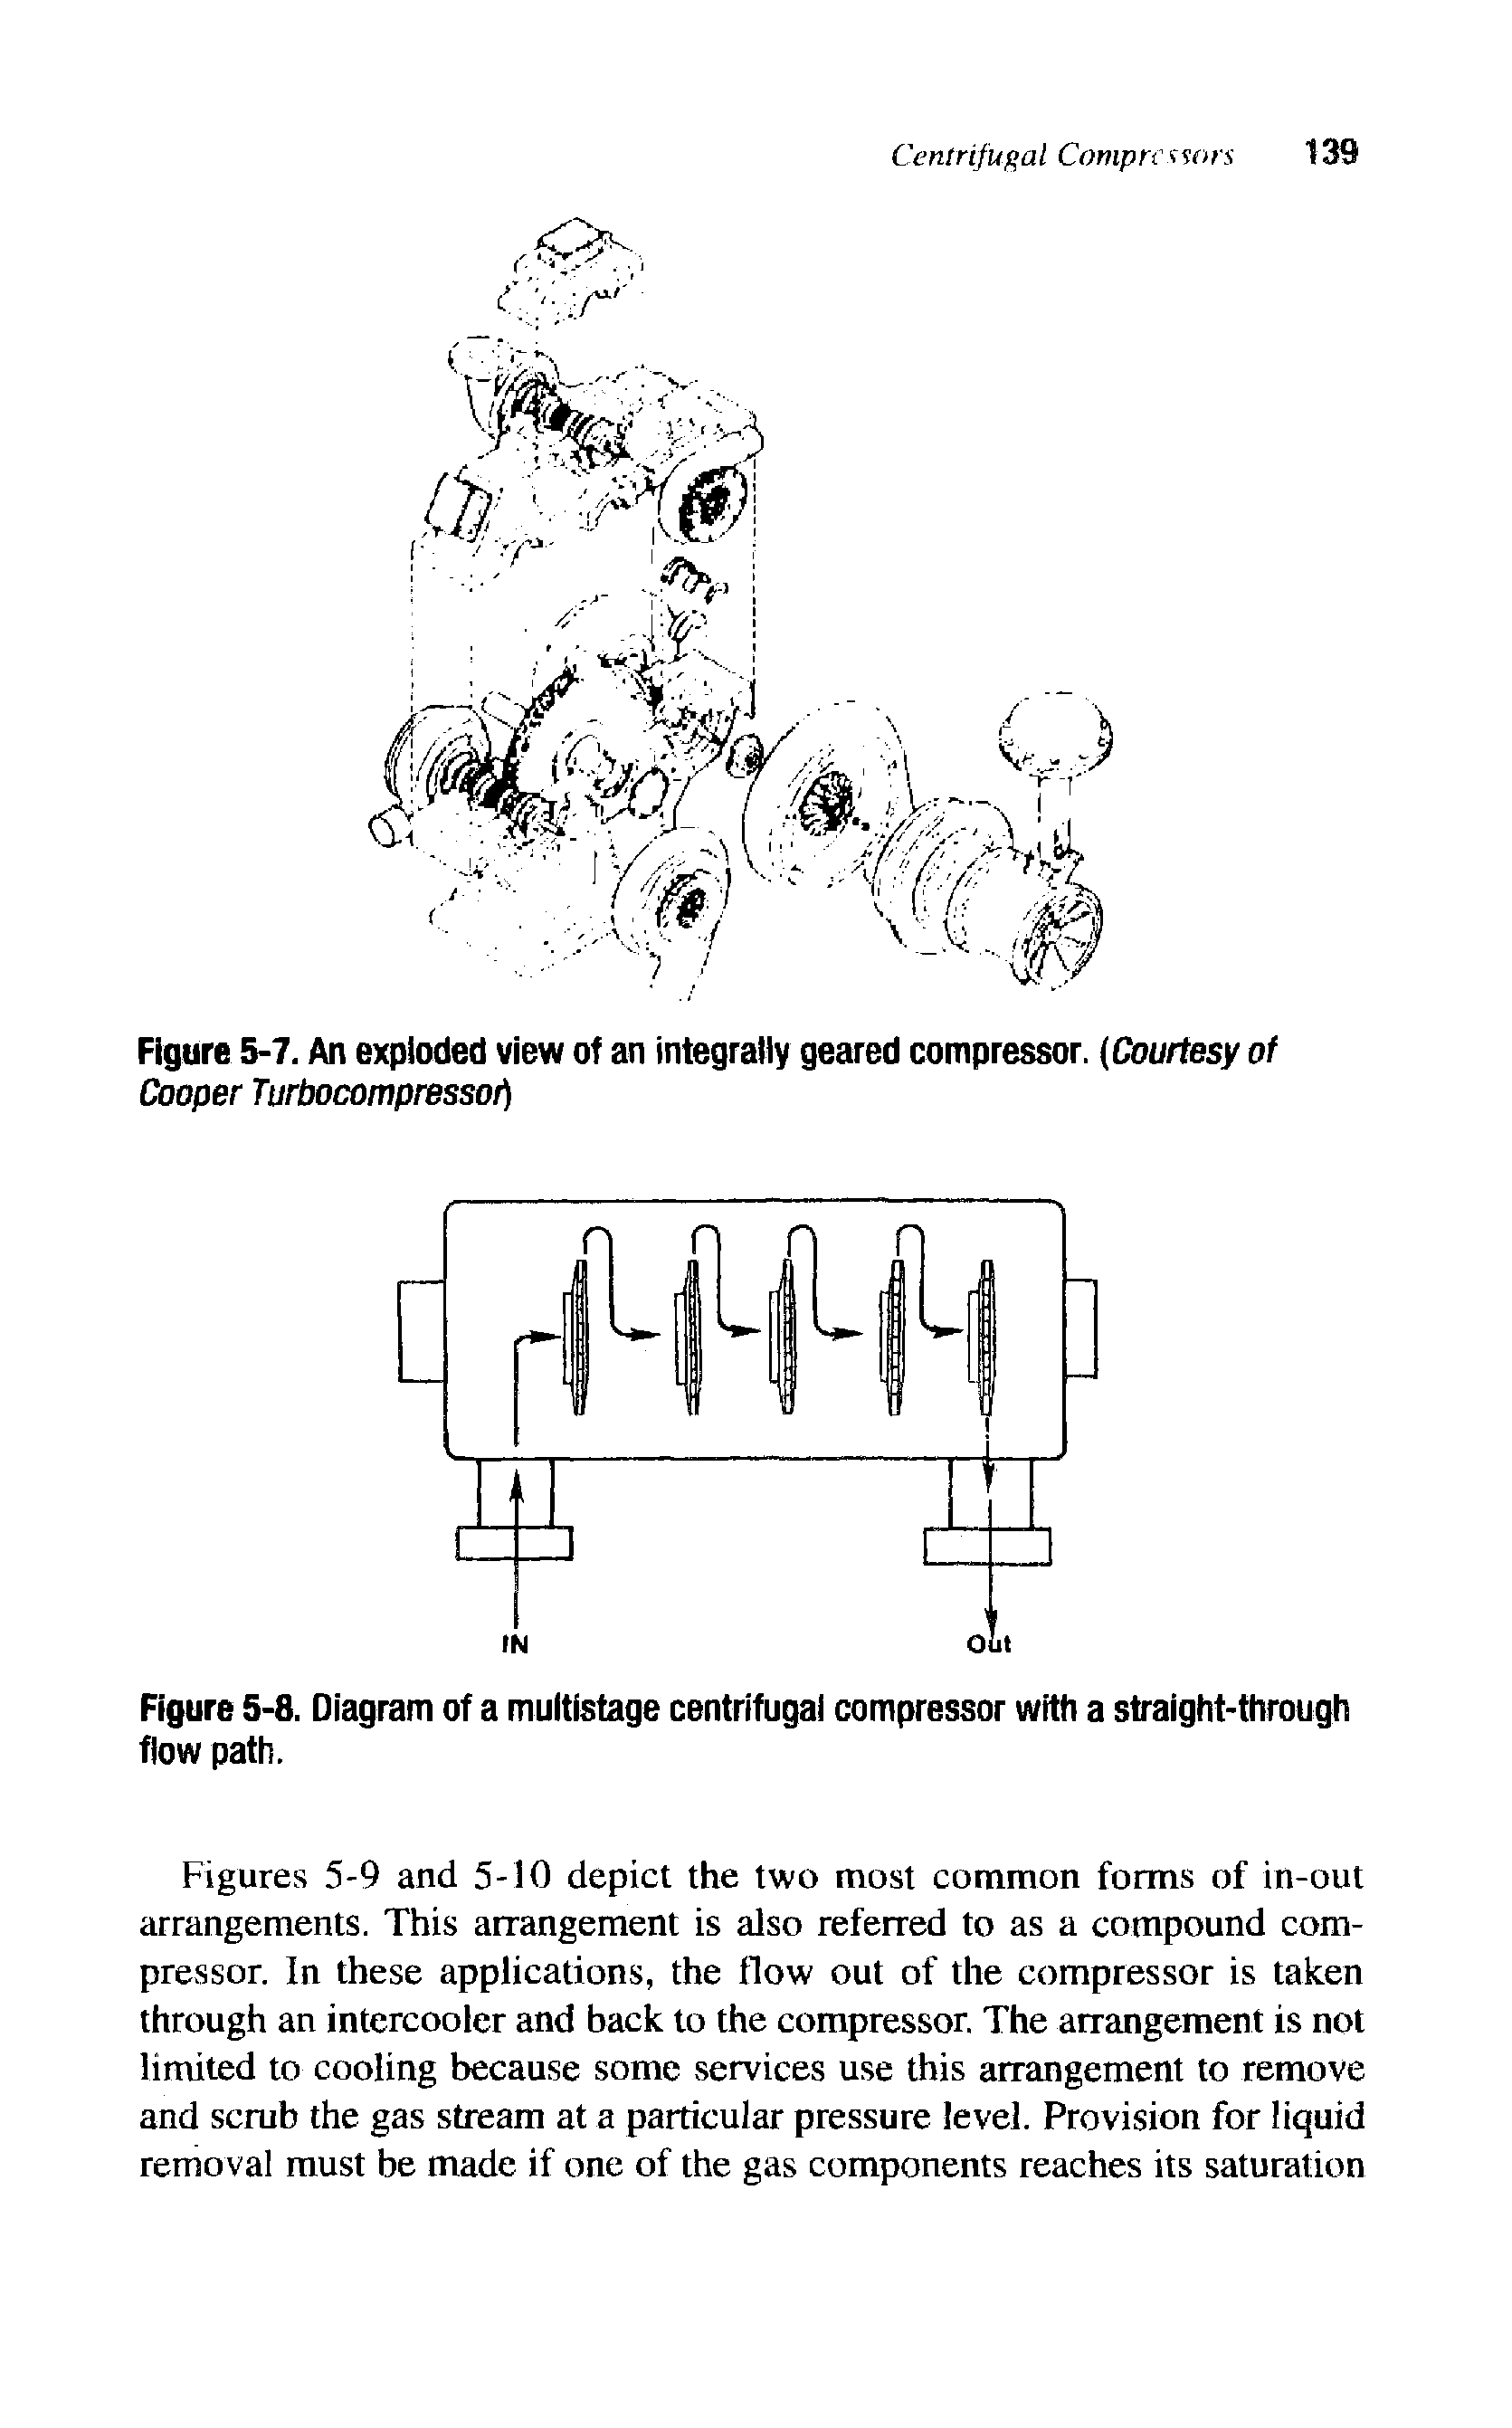 Figures 5-9 and 5-10 depict the two most common forms of in-out arrangements. This arrangement is also referred to as a compound compressor. In these applications, the flow out of the compressor is taken through an intercooler and back to the compressor. The arrangement is not limited to cooling because some services use this arrangement to remove and scrub the gas stream at a particular pressure level. Provision for liquid removal must be made if one of the gas components reaches its saturation...